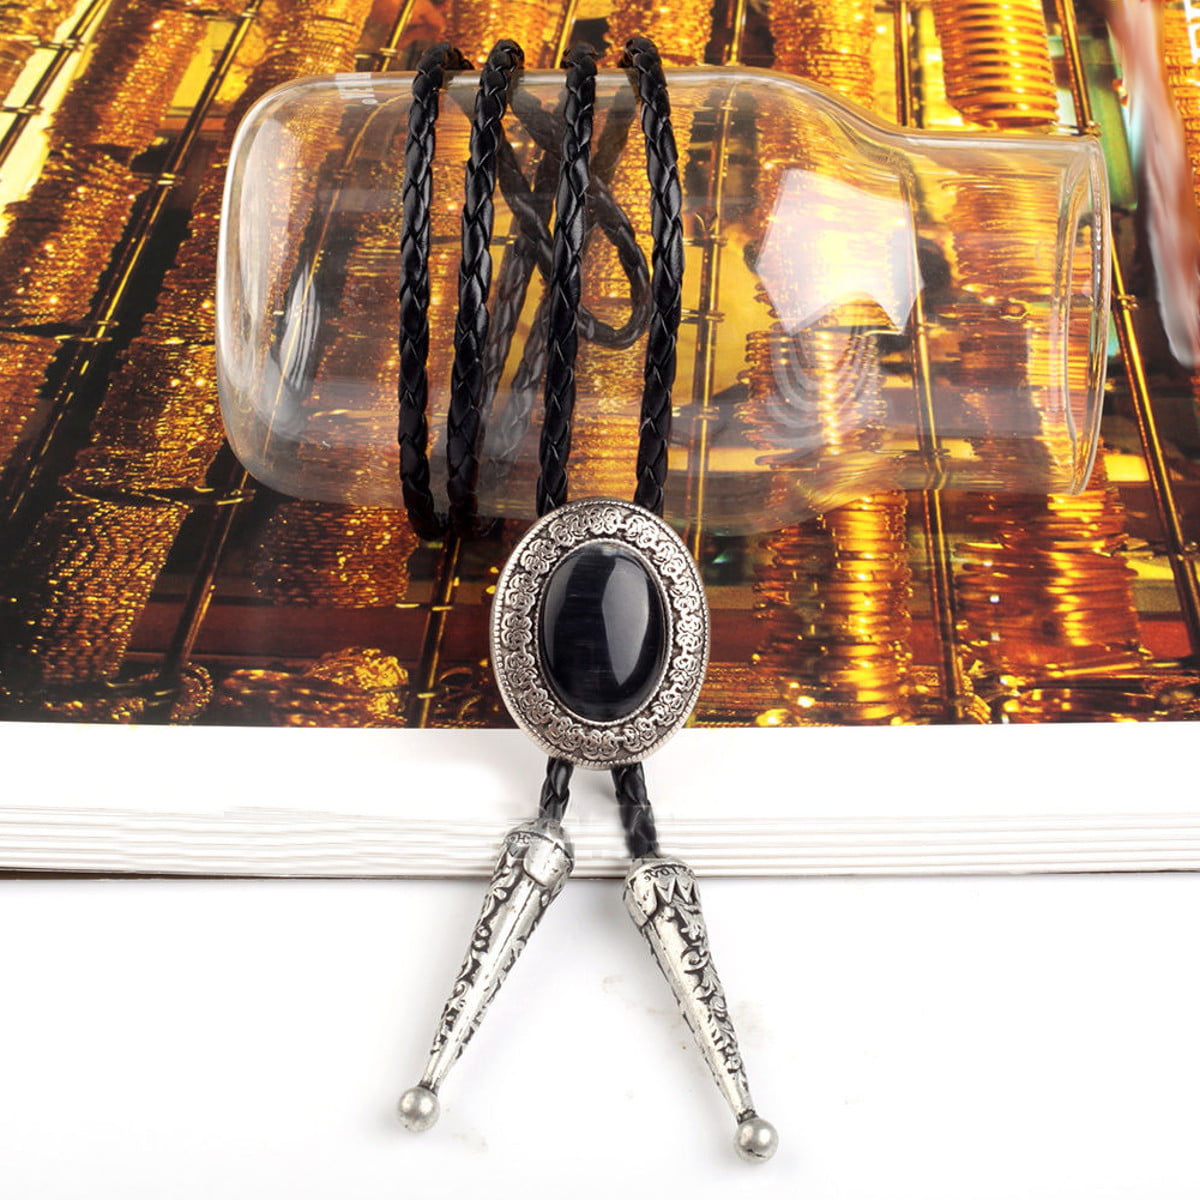 Details about   Indian Western Cowboy Black Stone Bolo Tie Rodeo Dance Necktie Bootlace Ties 